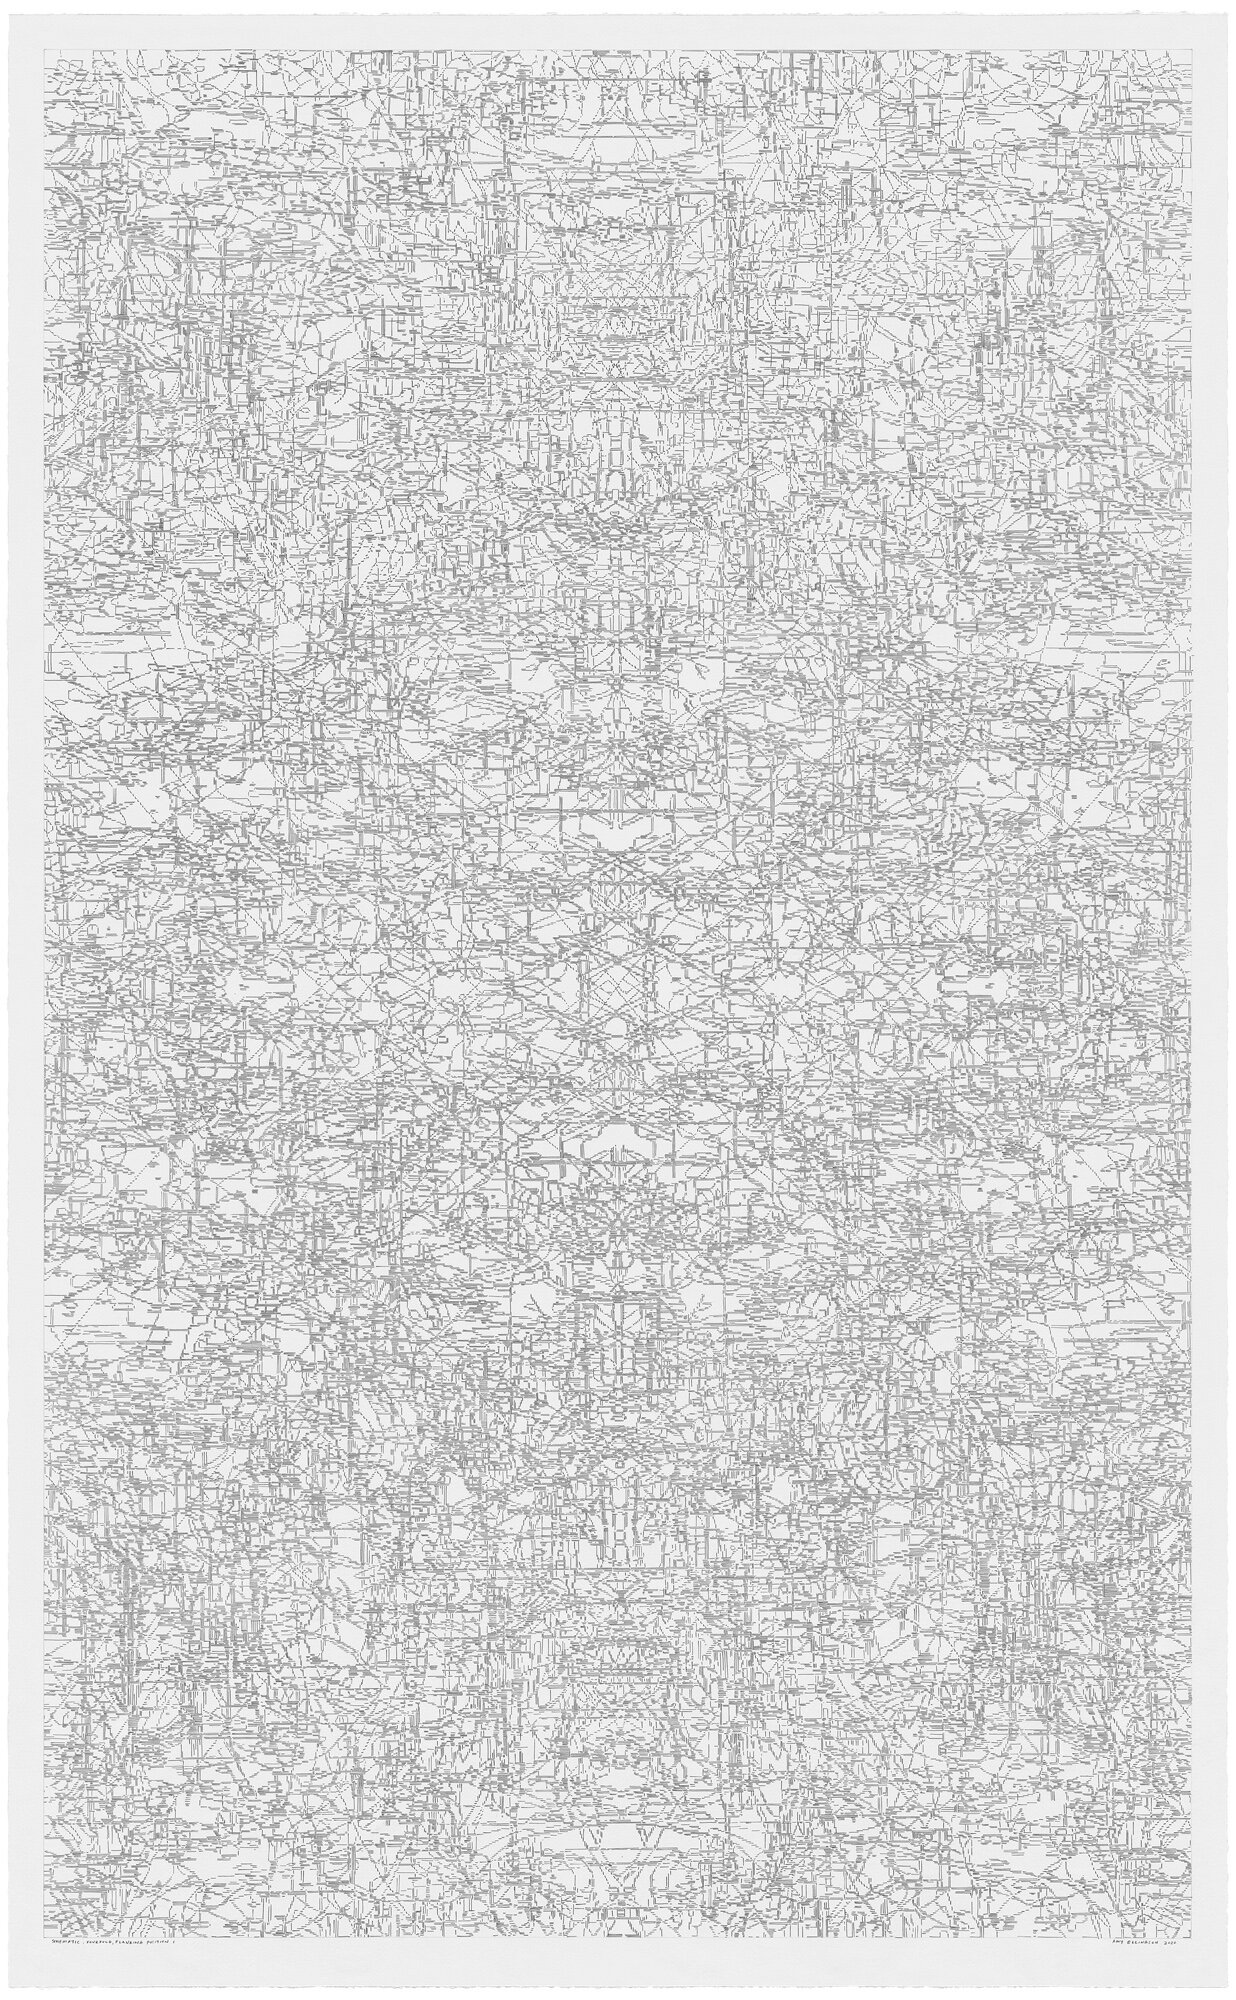   Schematic: Fourfold, Flanking Position I,  2020 Graphite on Rising Stonehenge Paper  Image size: 69 x 42; paper size: 72 x 44 ½ inches  